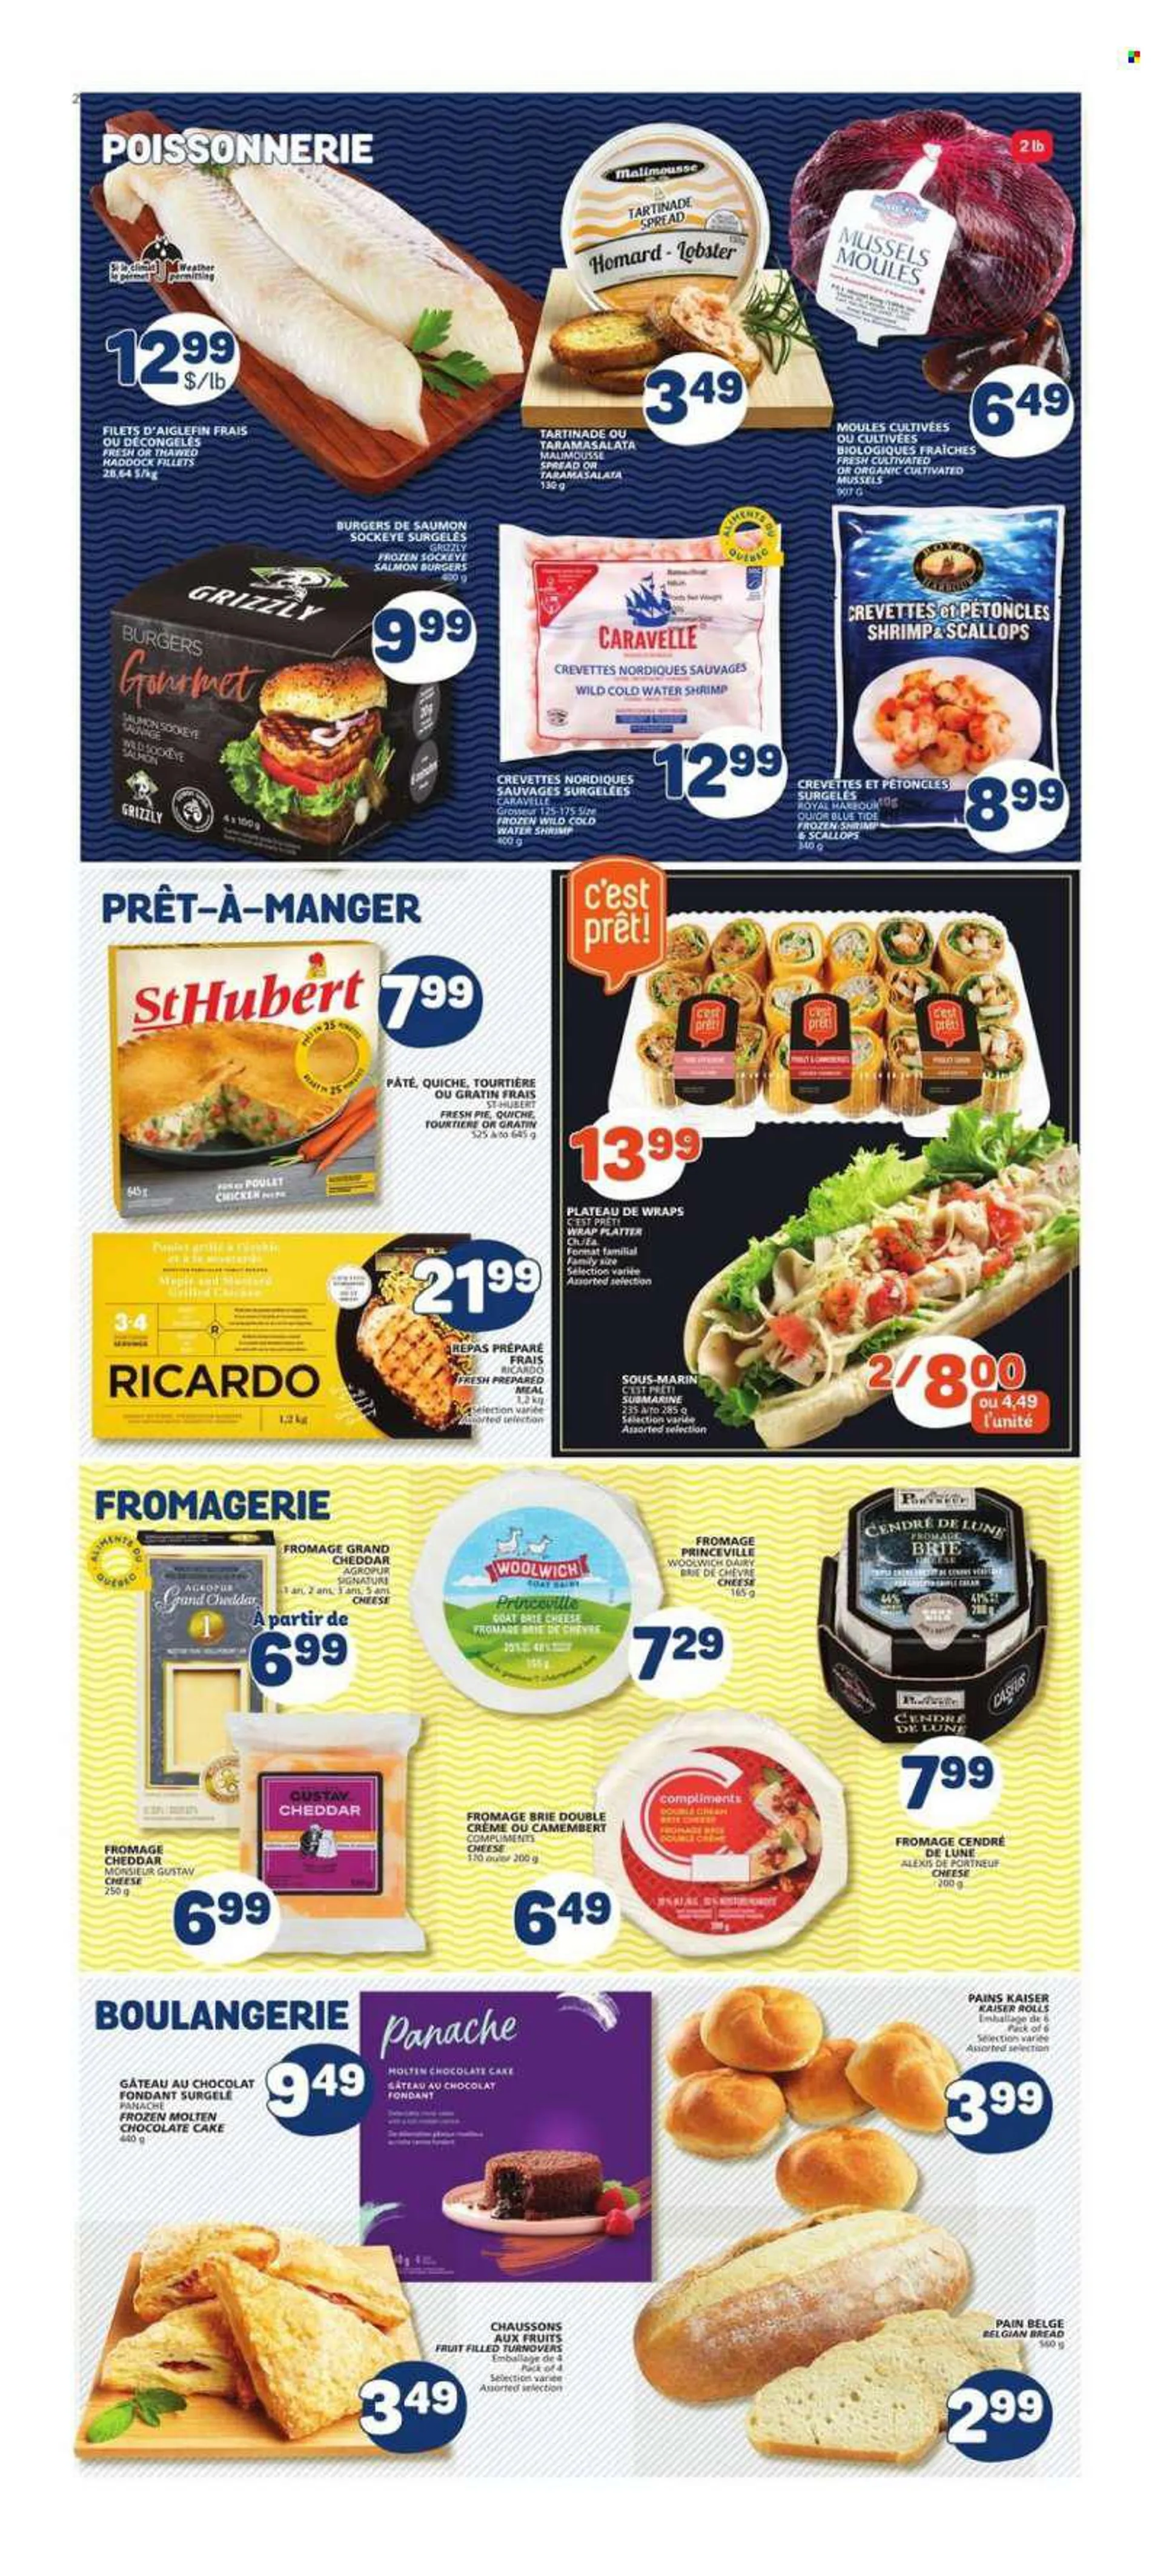 Marché Bonichoix Flyer - June 30, 2022 - July 06, 2022 - Sales products - bread, cake, pie, turnovers, wraps, chocolate cake, lobster, mussel, salmon, scallops, haddock, shrimps, hamburger, cheddar, cheese, brie cheese, Quiche, chocolate, mustard, Tide, c